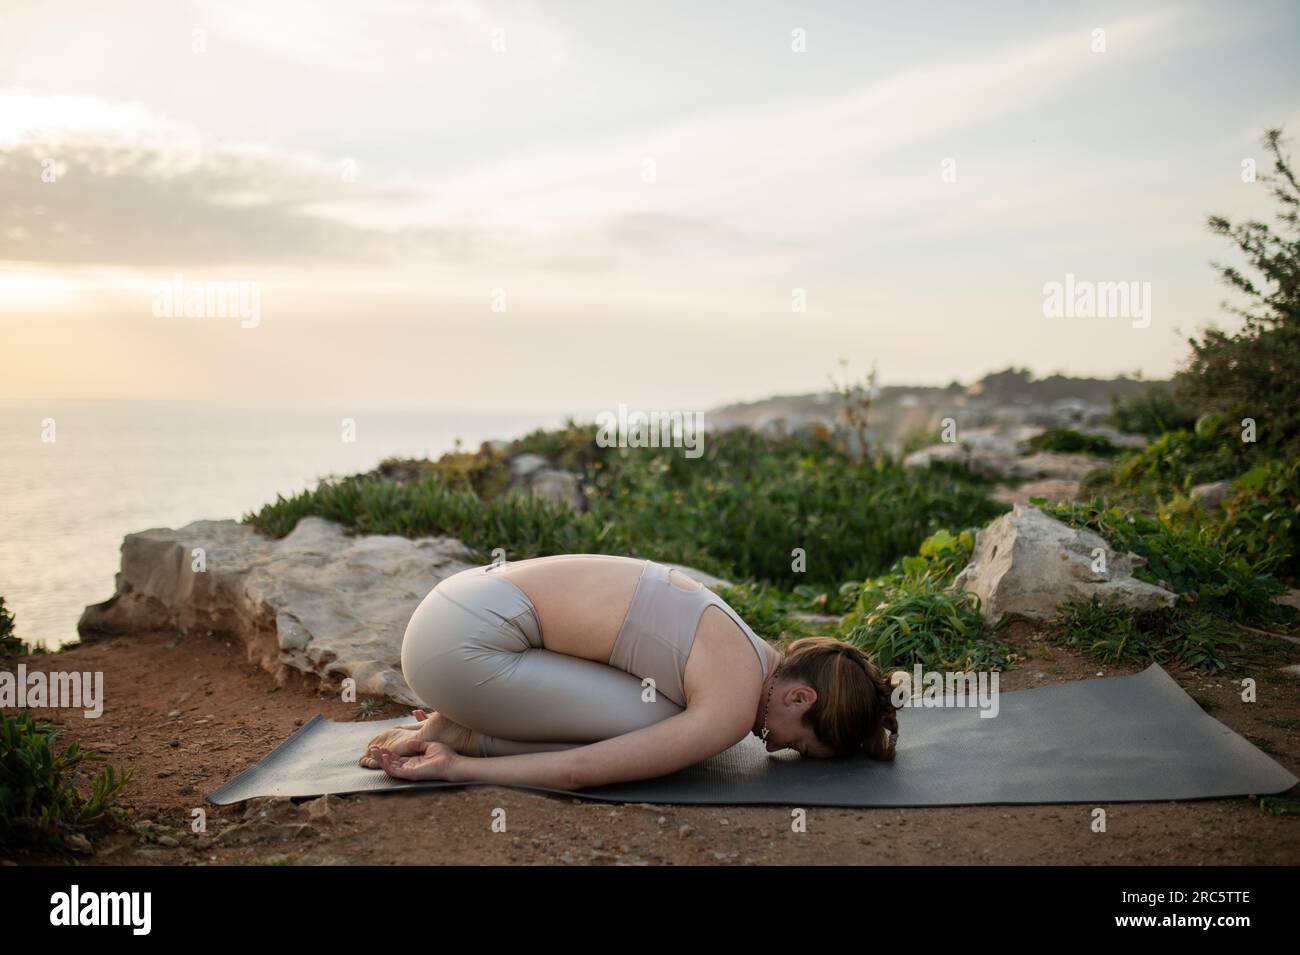 Young practices Alamy outdoor Stock european enjoys Photo lady in yoga, sportswear workout morning -